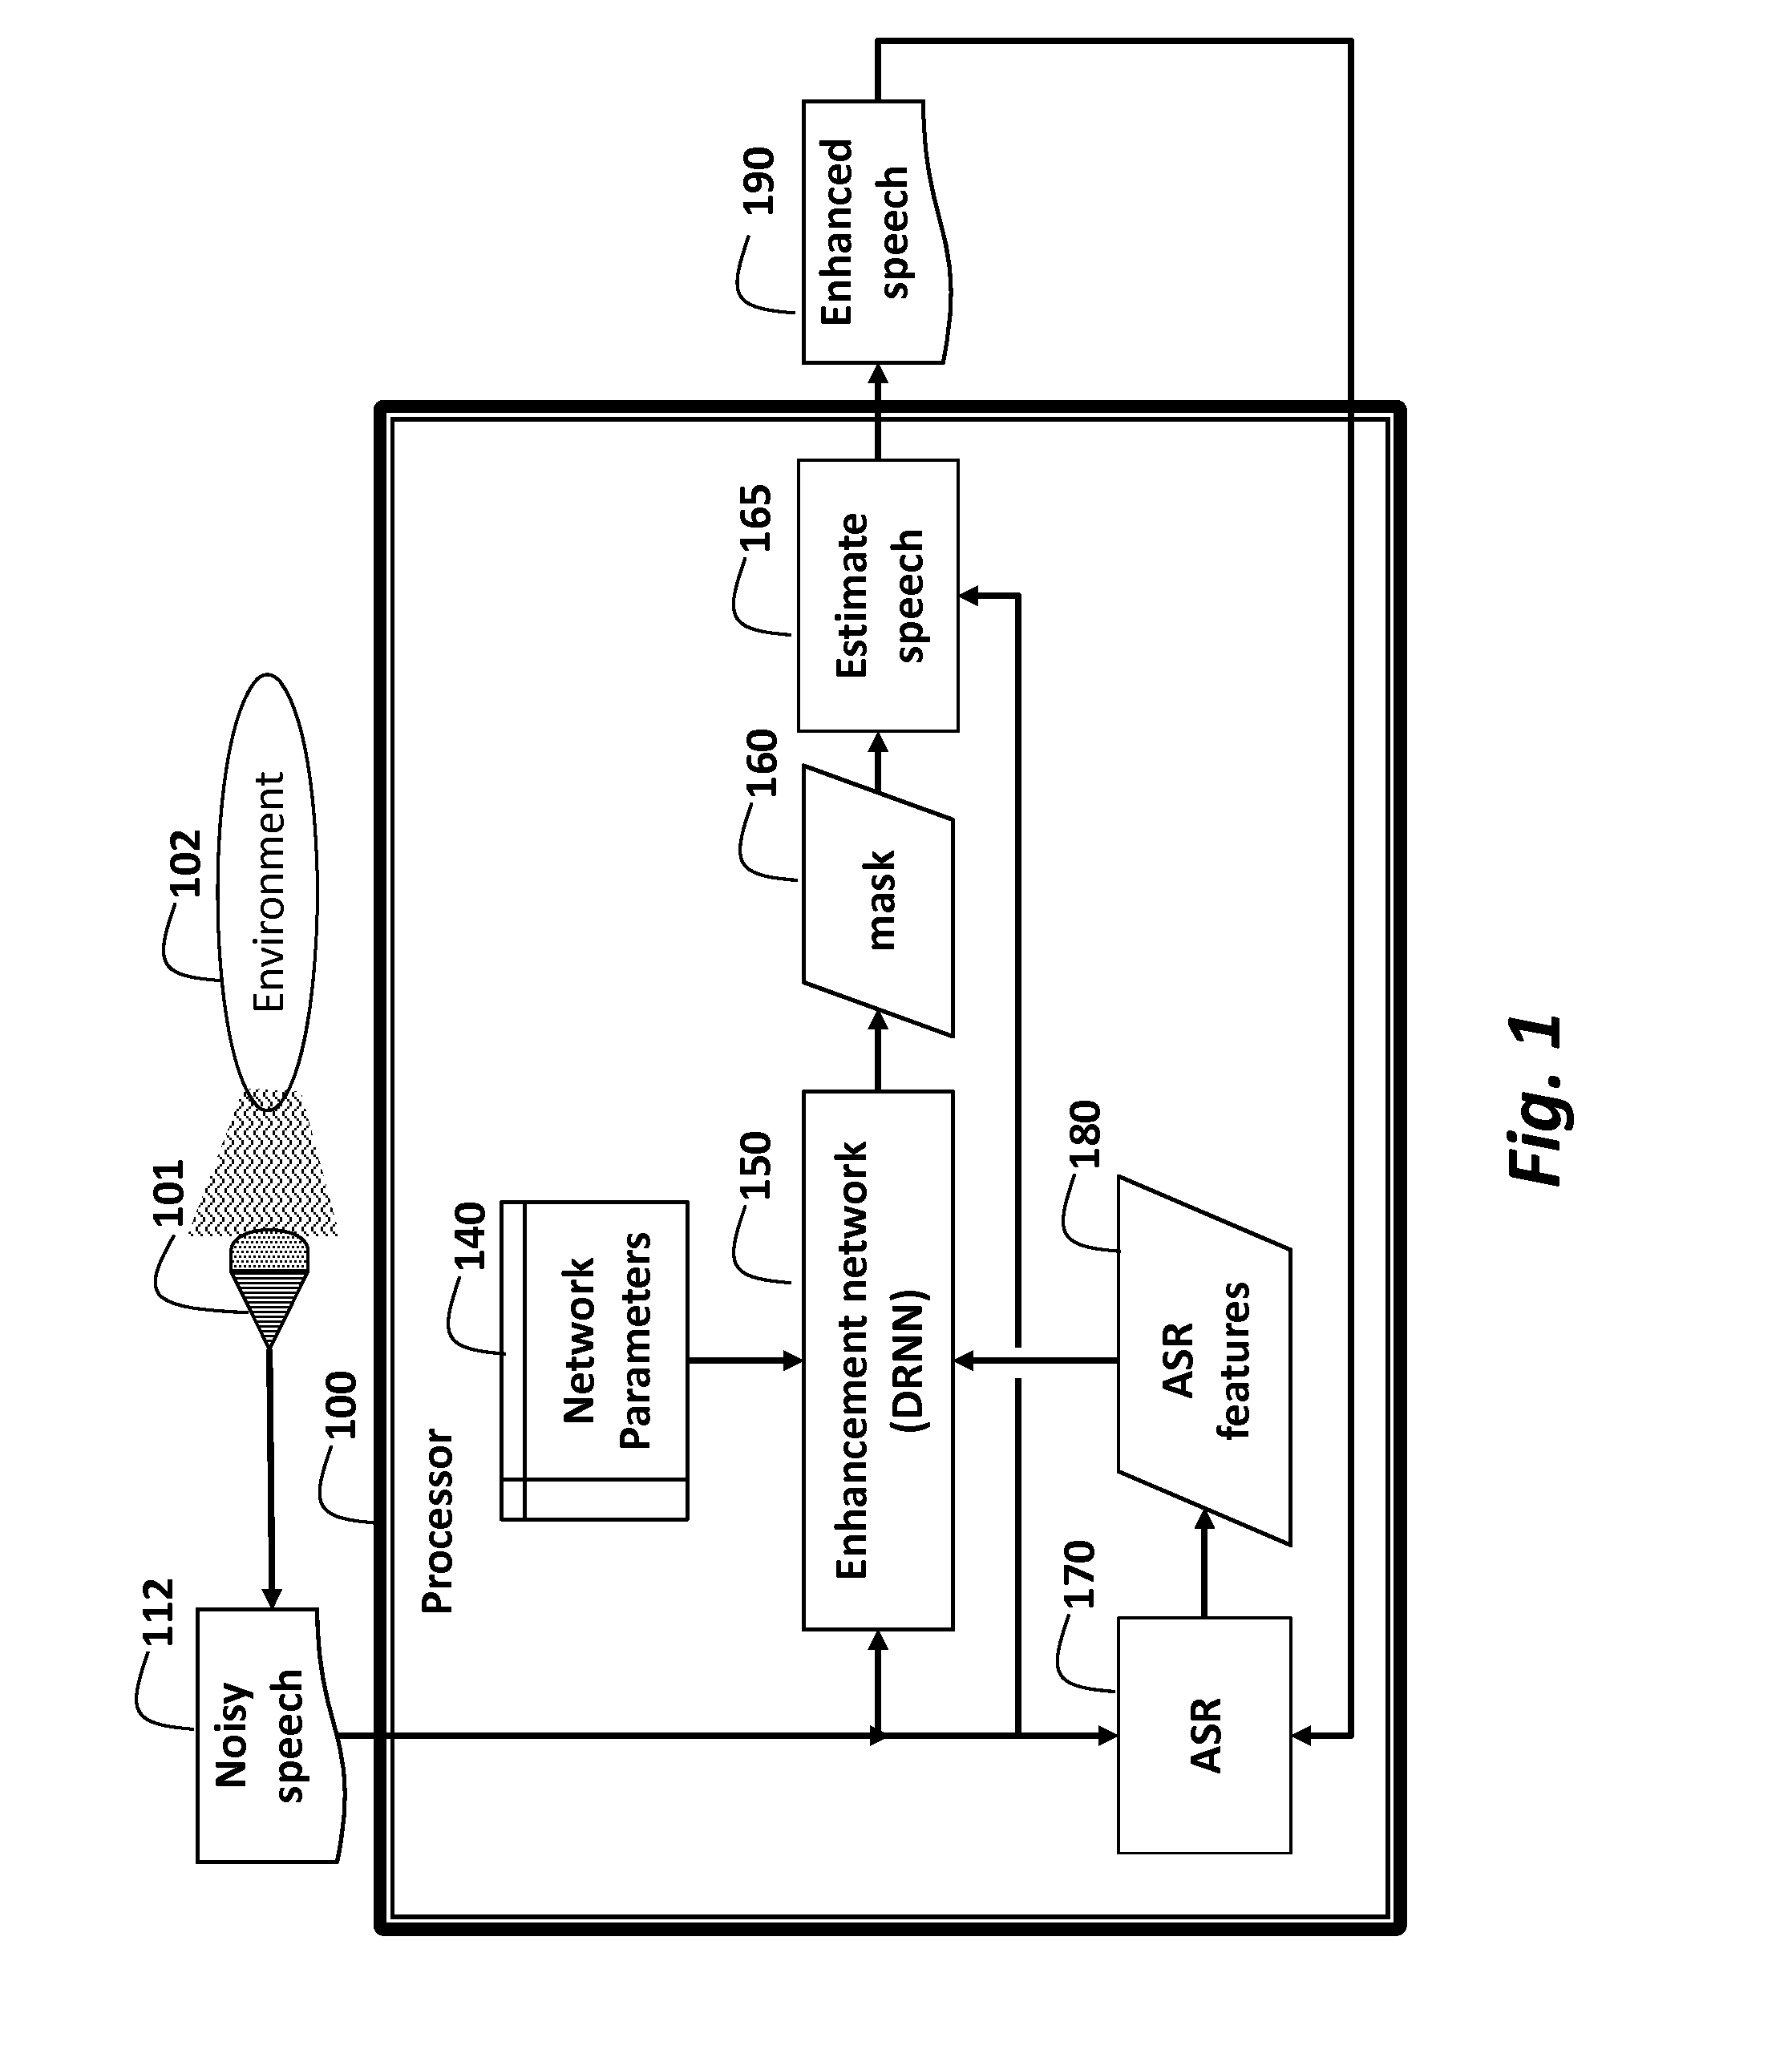 Method for Enhancing Noisy Speech using Features from an Automatic Speech Recognition System